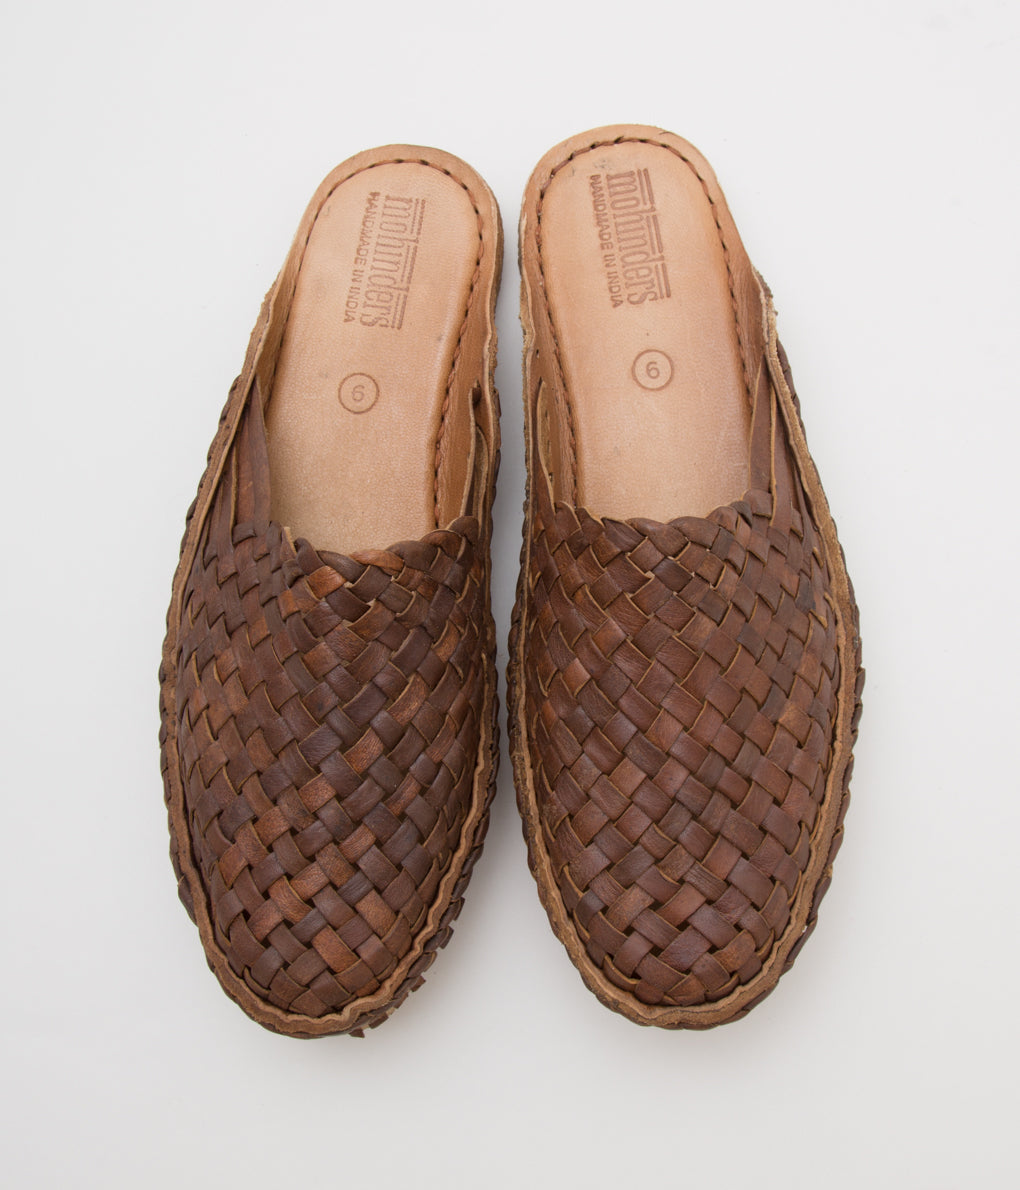 MOHINDERS "WOVEN CITY SLIPPER" (OILED BROWN)